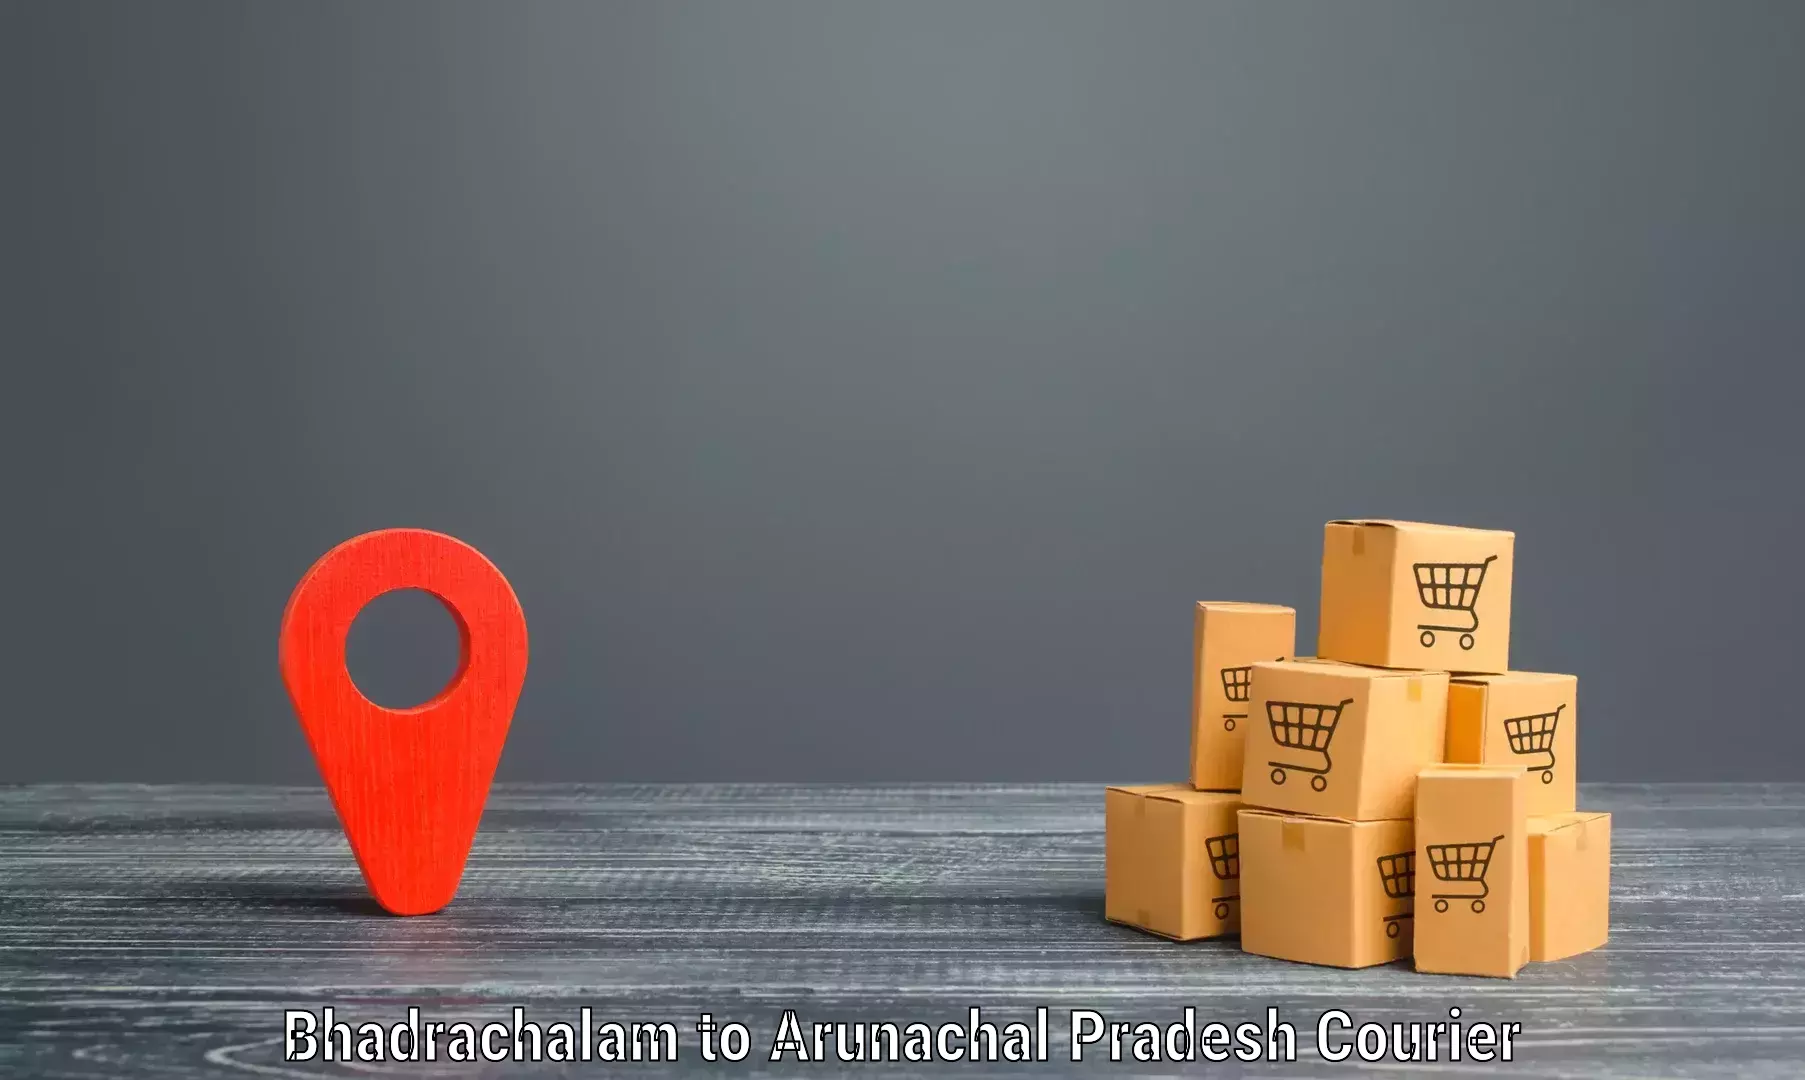 Reliable courier service in Bhadrachalam to Kurung Kumey